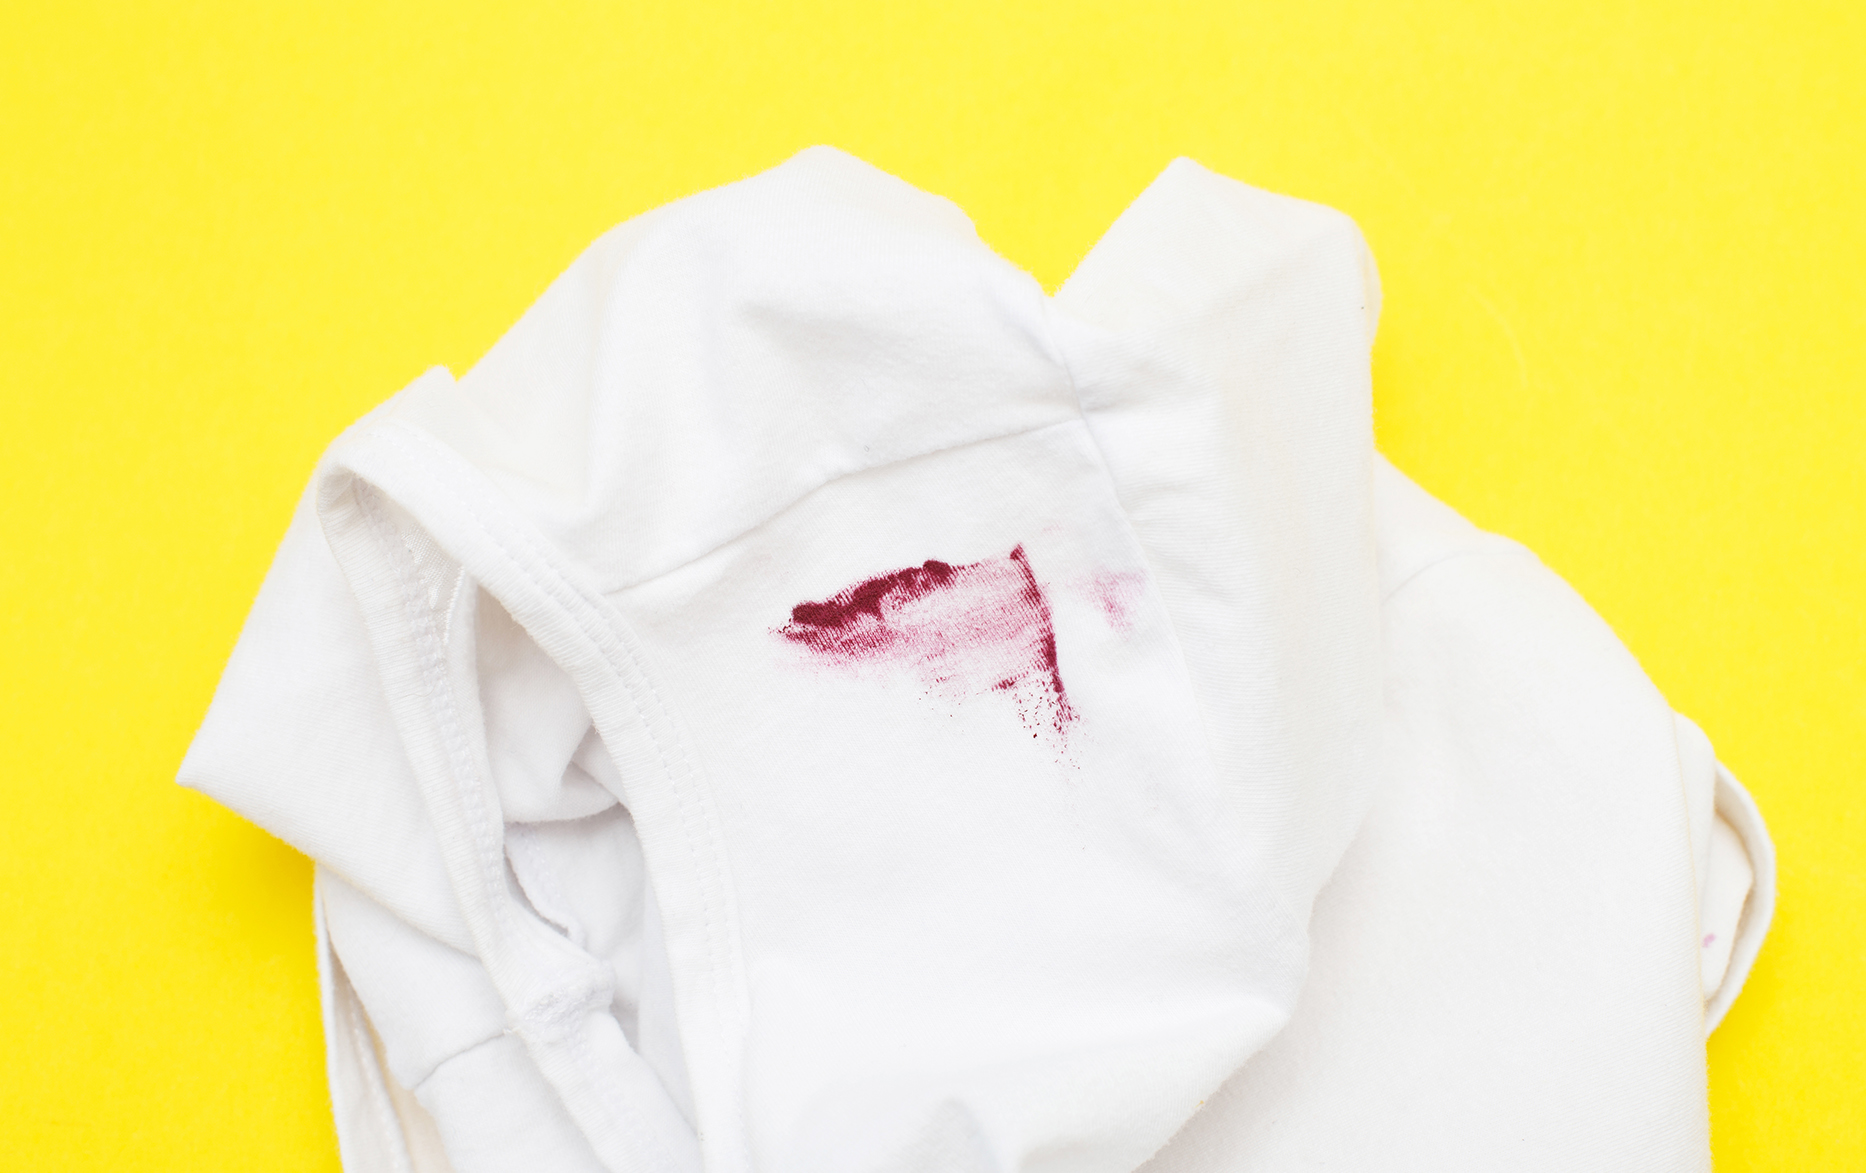 How to Remove Lipstick from Clothes